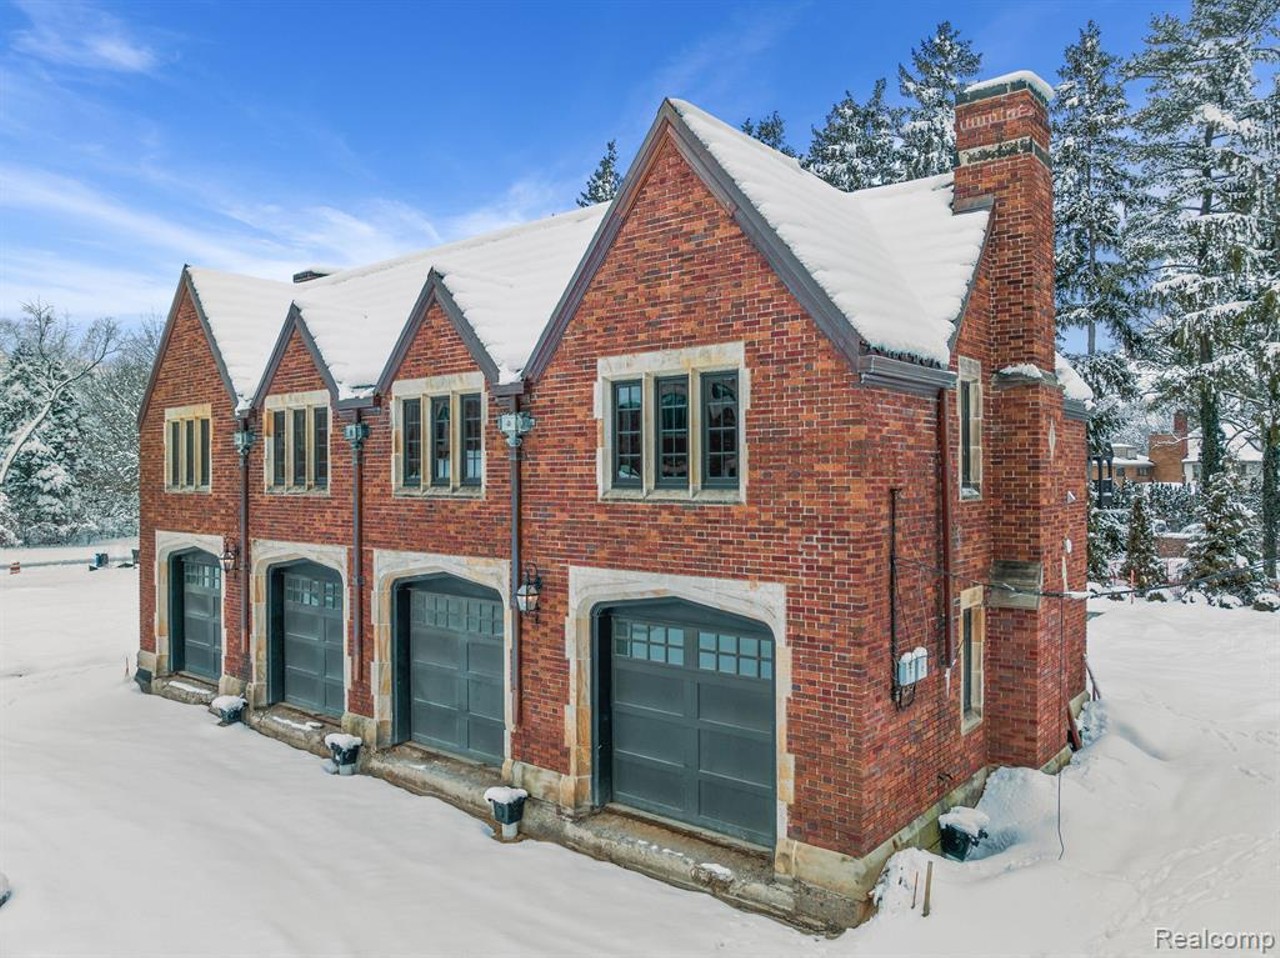 The Bishop Mansion in Detroit is for sale for nearly $9 million [PHOTOS]